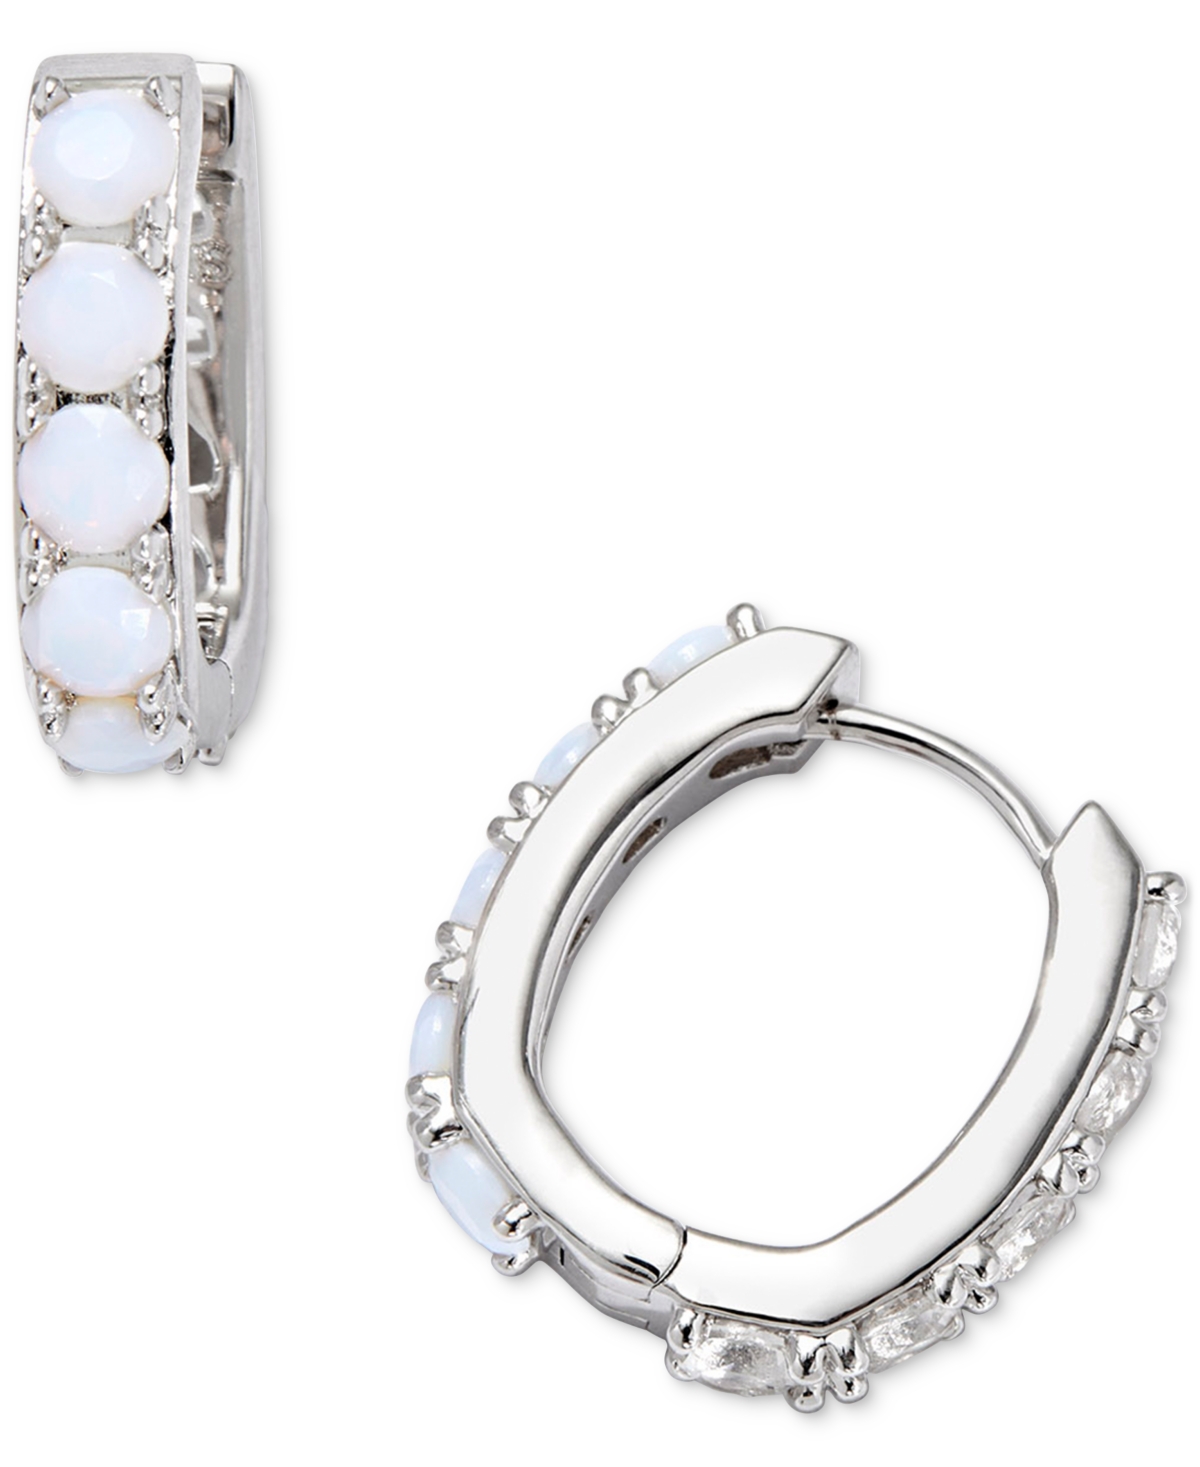 Small Mixed Stone Huggie Hoop Earrings, 0.65" - White Opalite Mix/ Silver